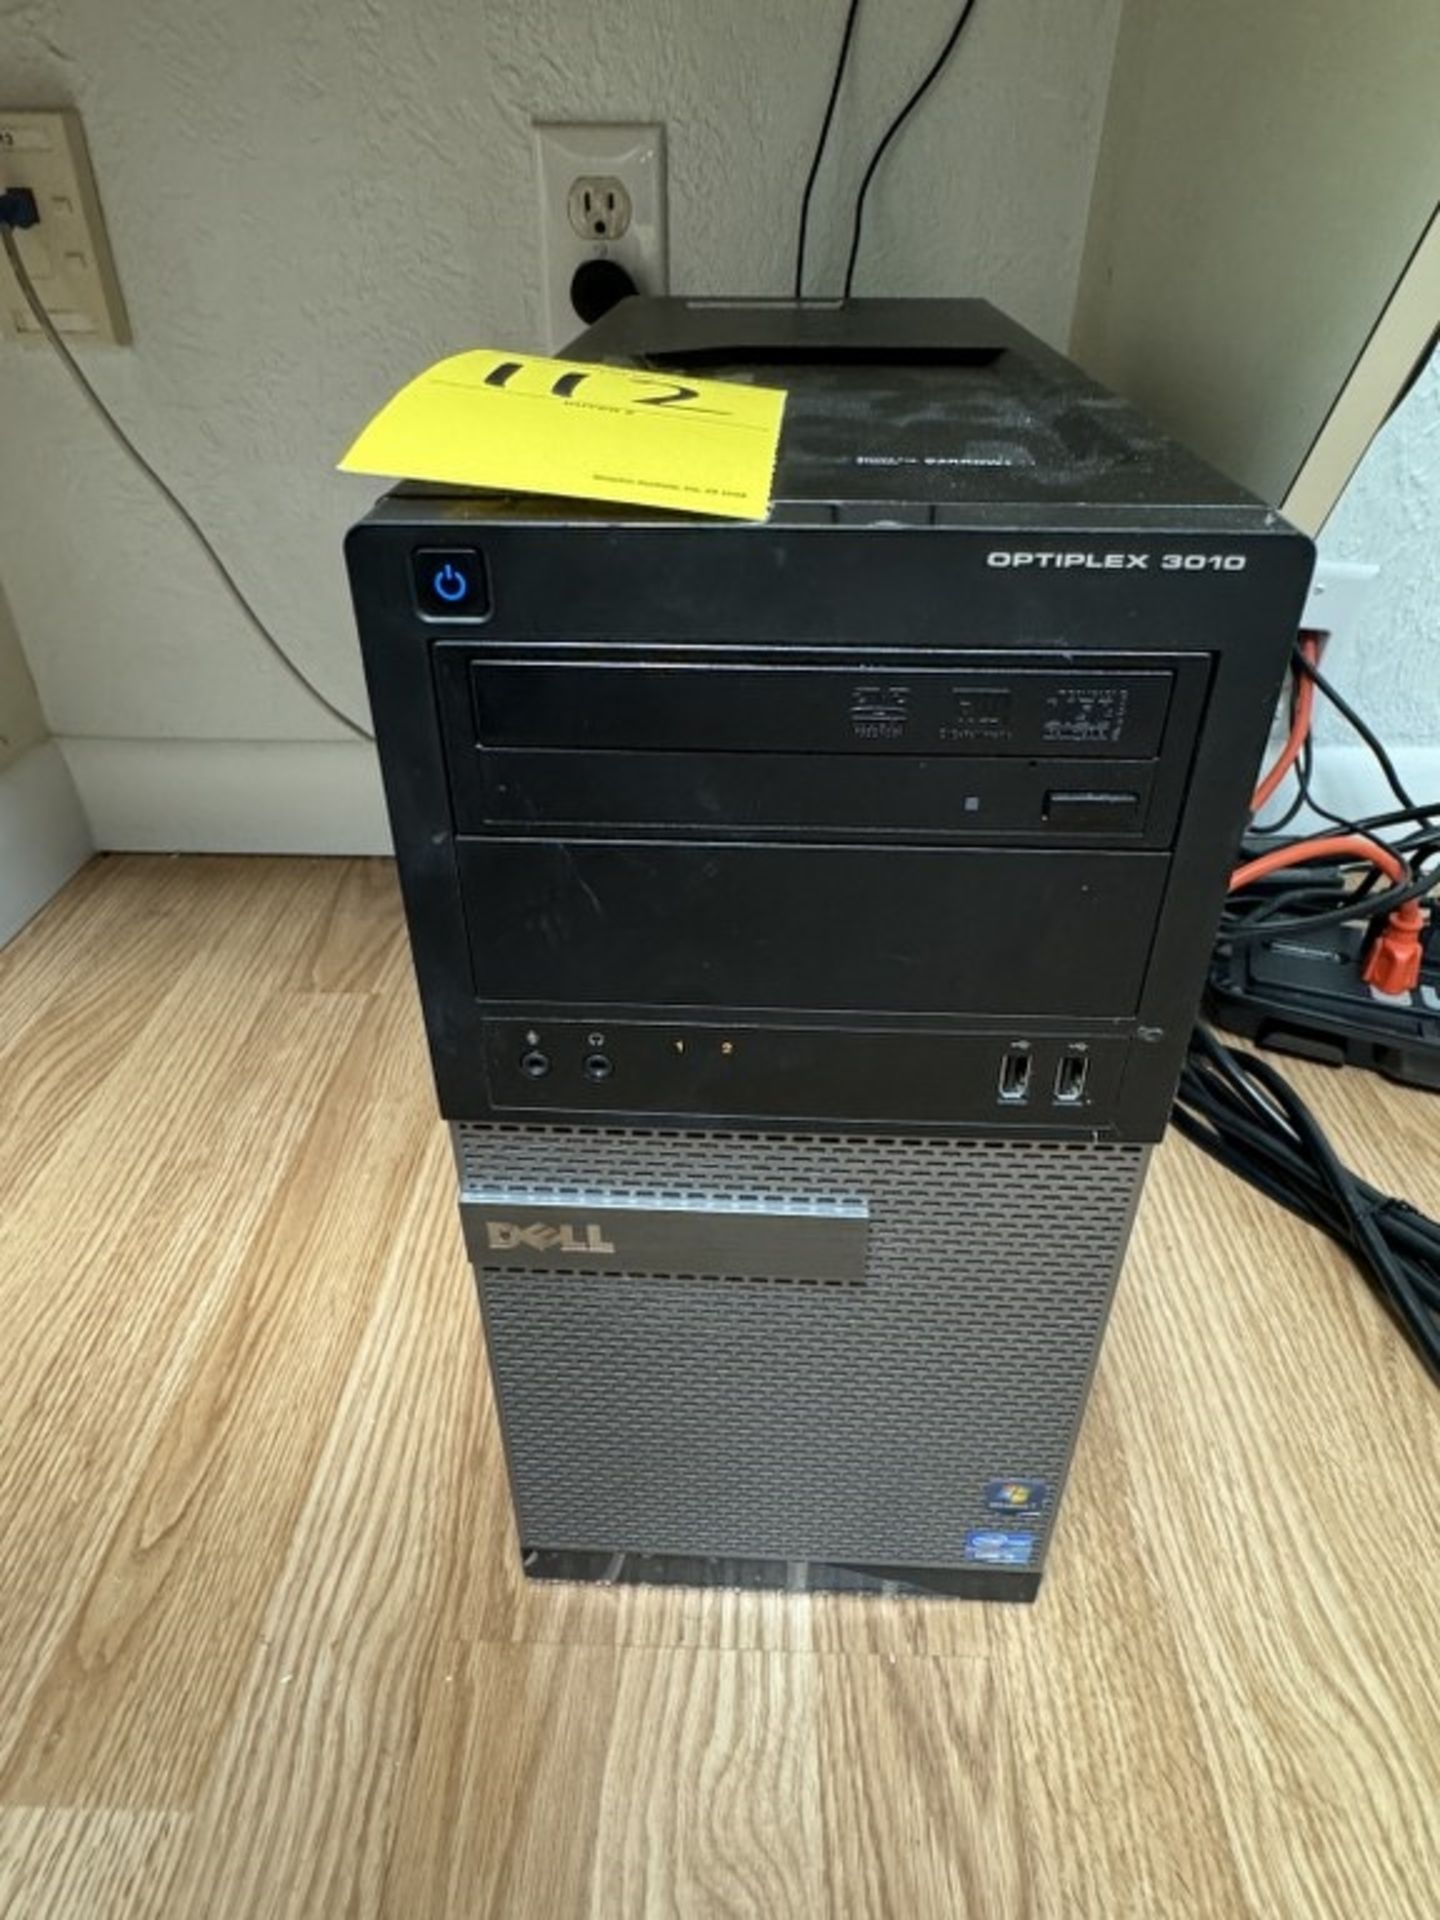 DELL OPTIPLEX 3010 COMPUTER SYSTEM - Image 2 of 5